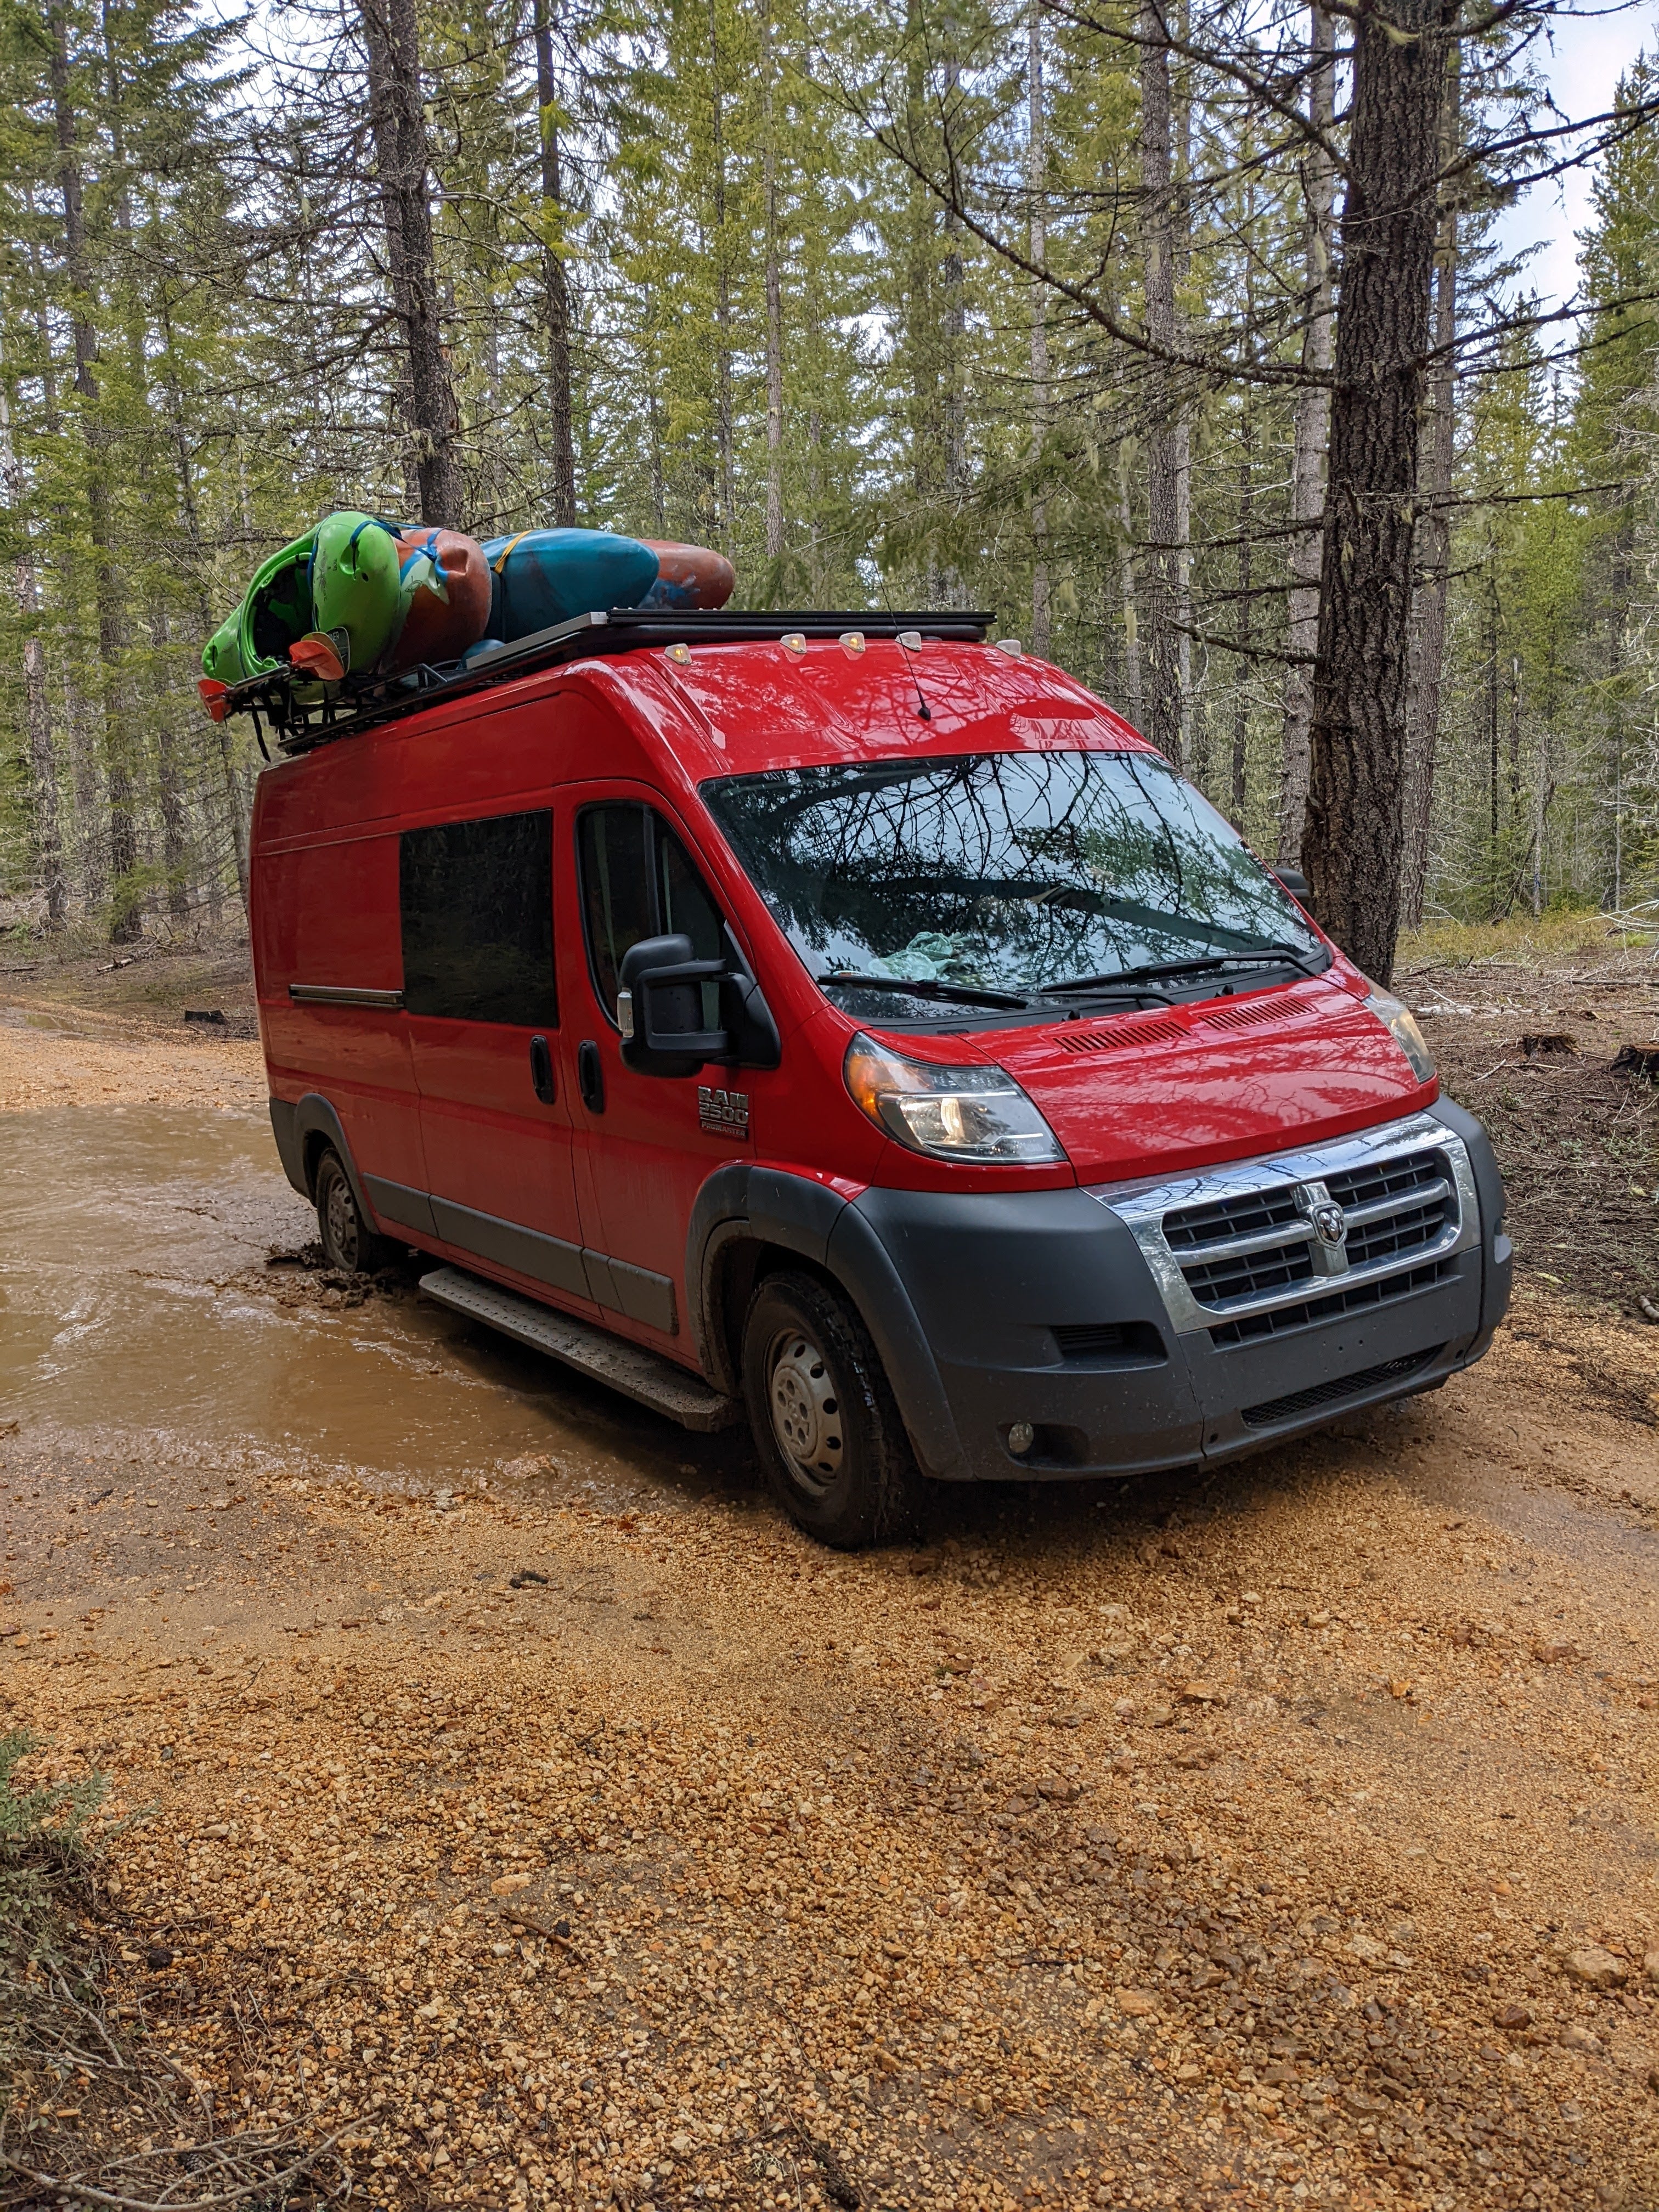 Which Van is the BEST for vanlife?